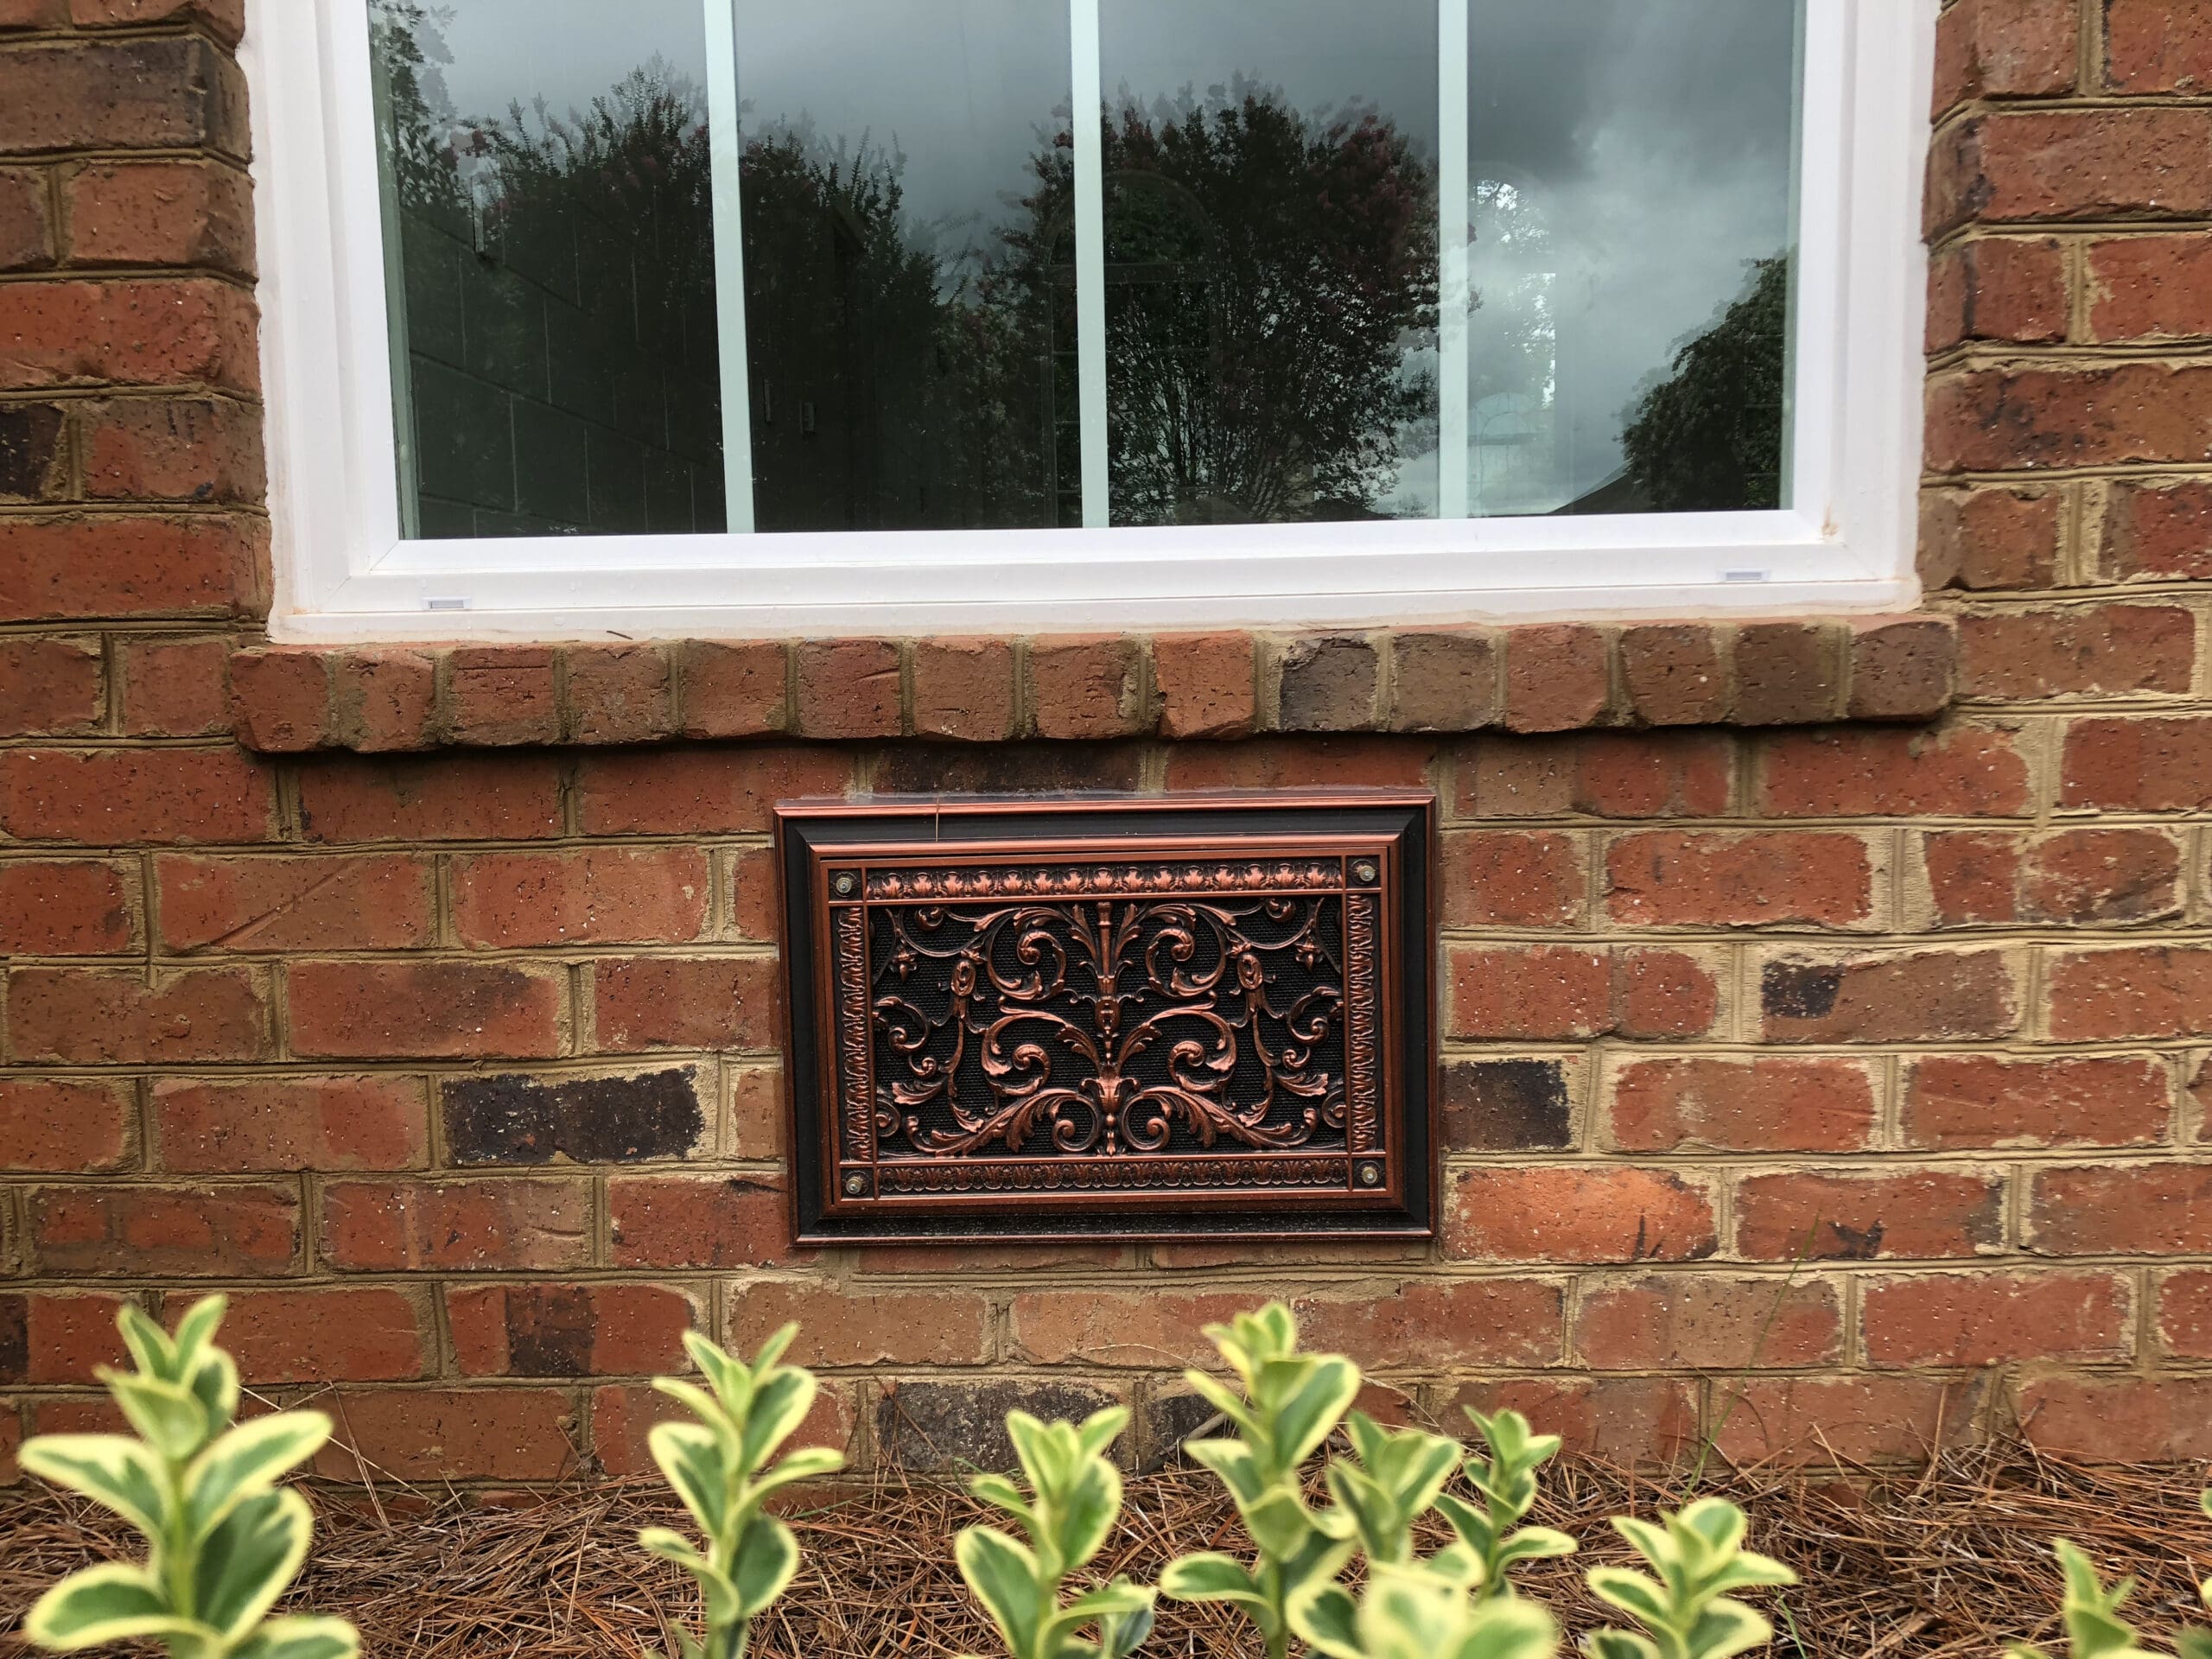 Foundation vent cover in french style.